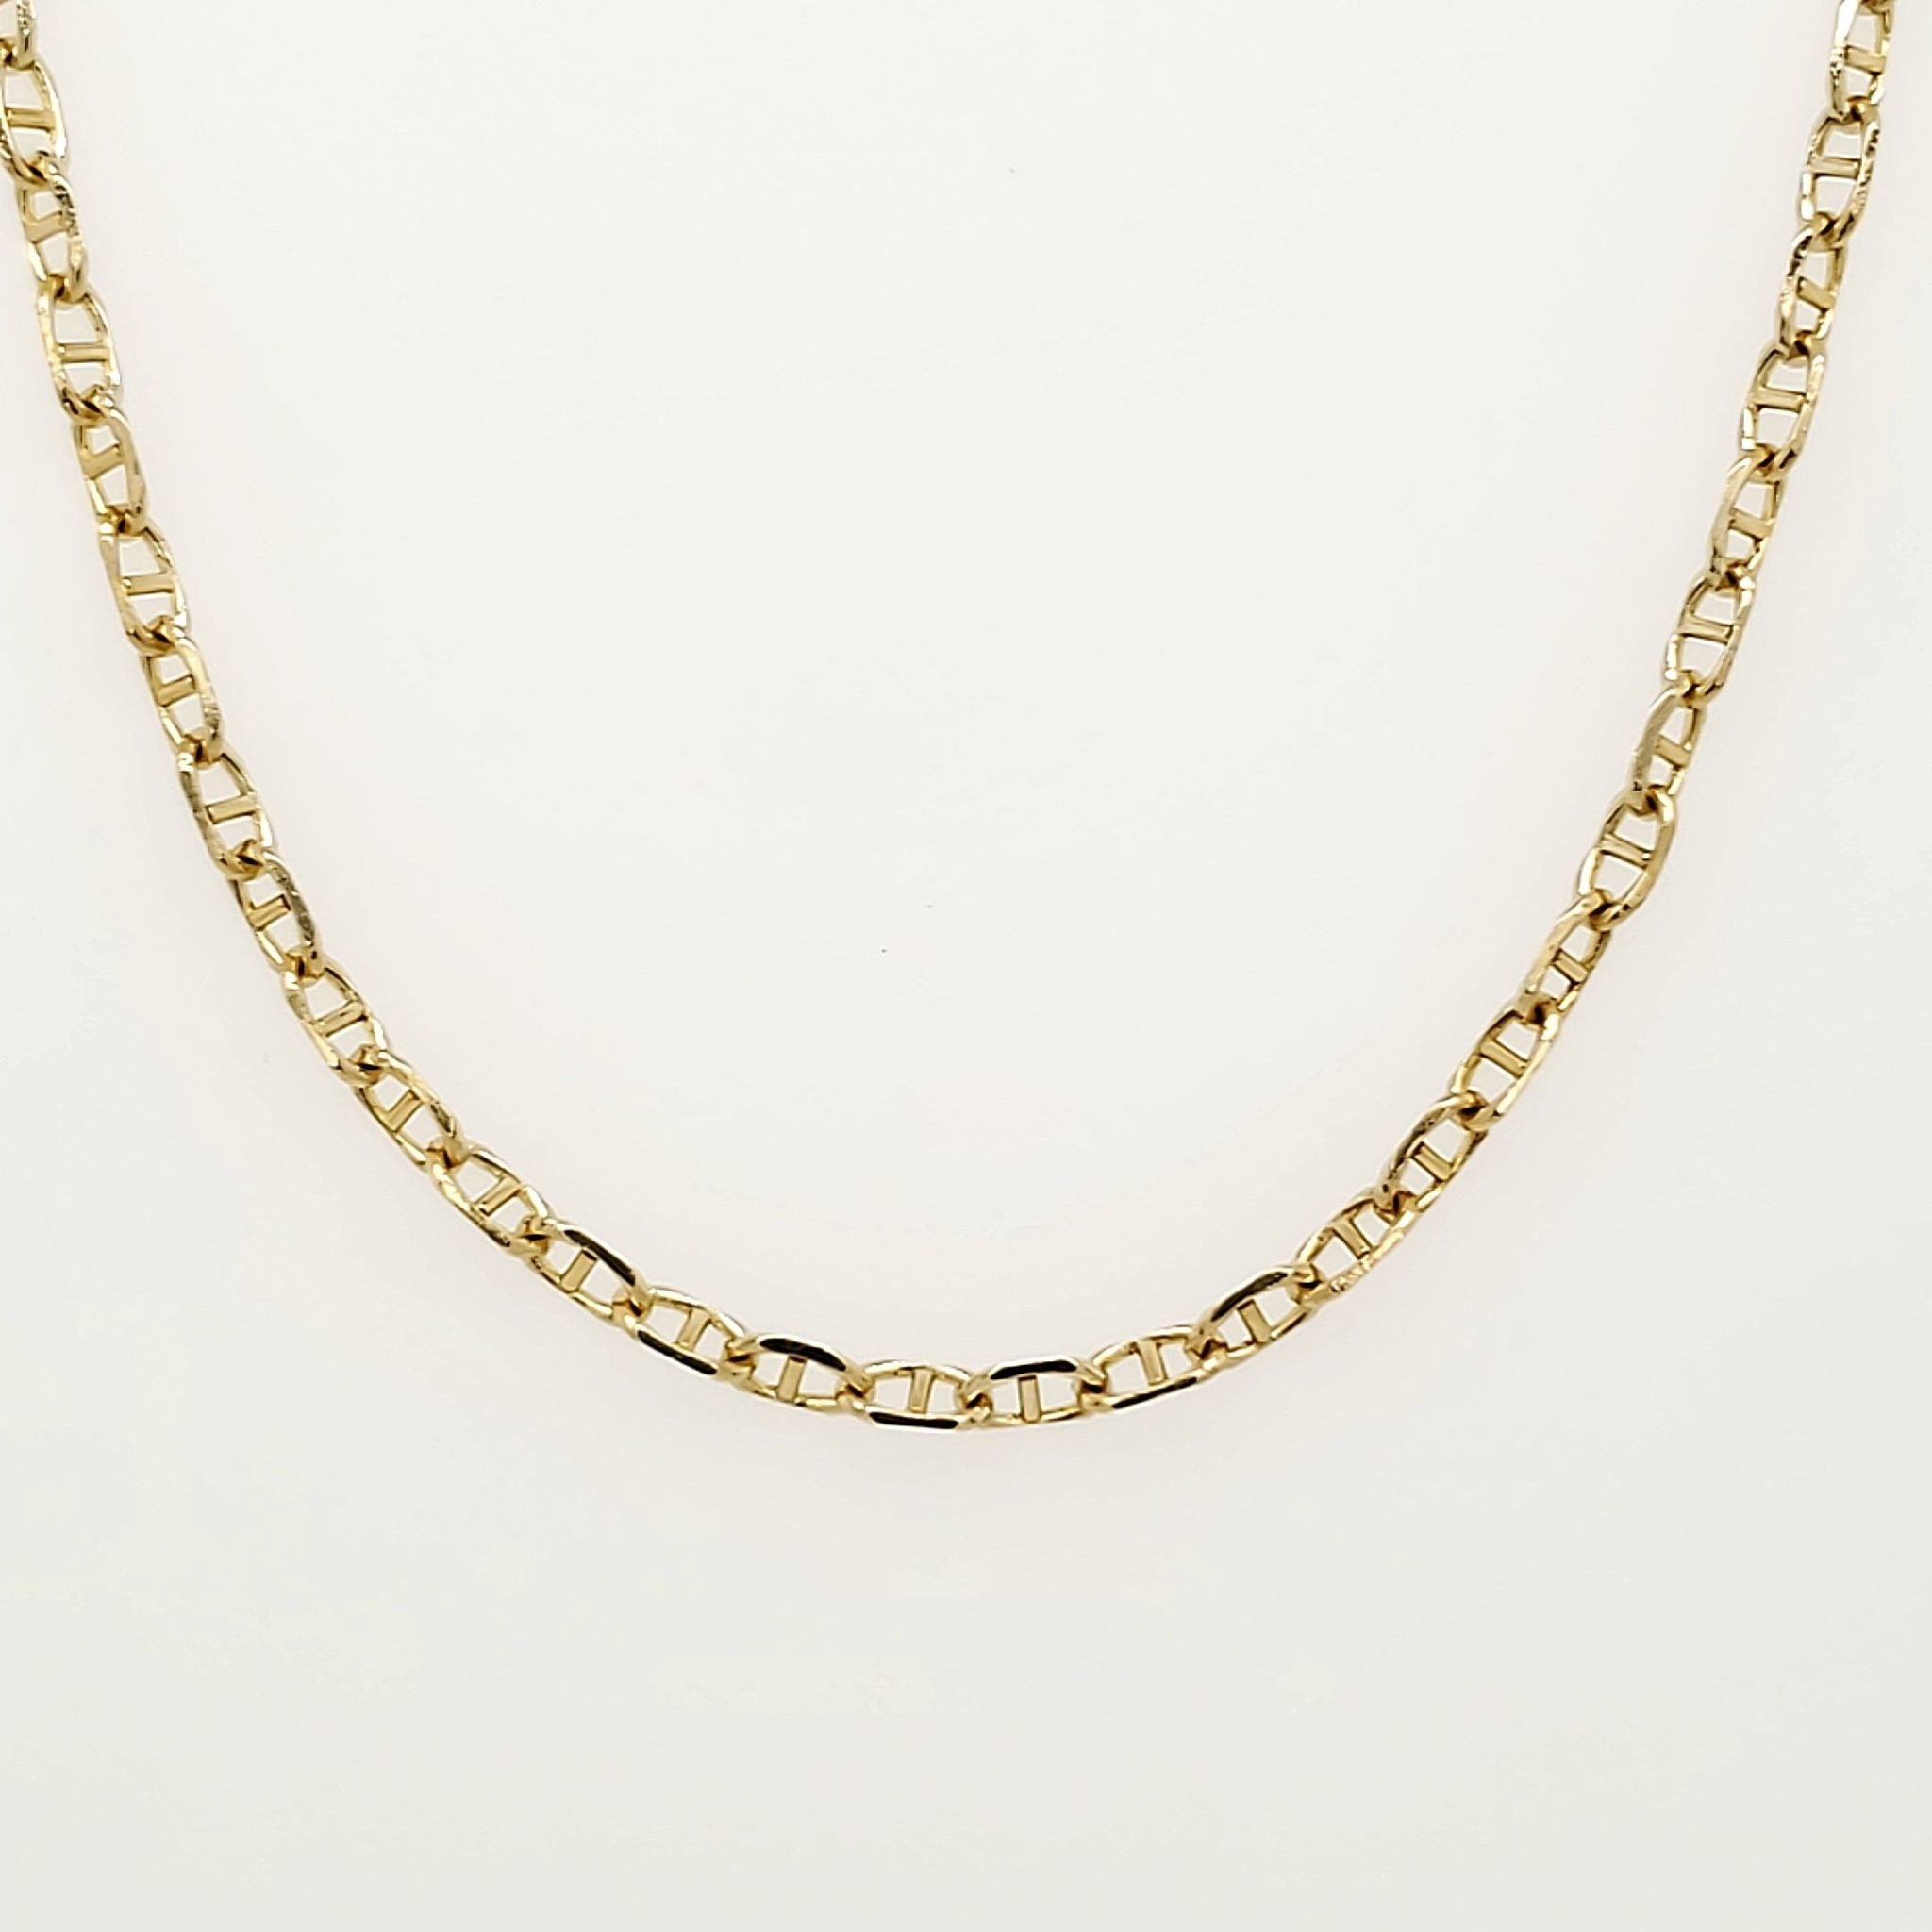 50135 14K YELLOW GOLD 20" GUCCI LINK 2.25MM CHAIN